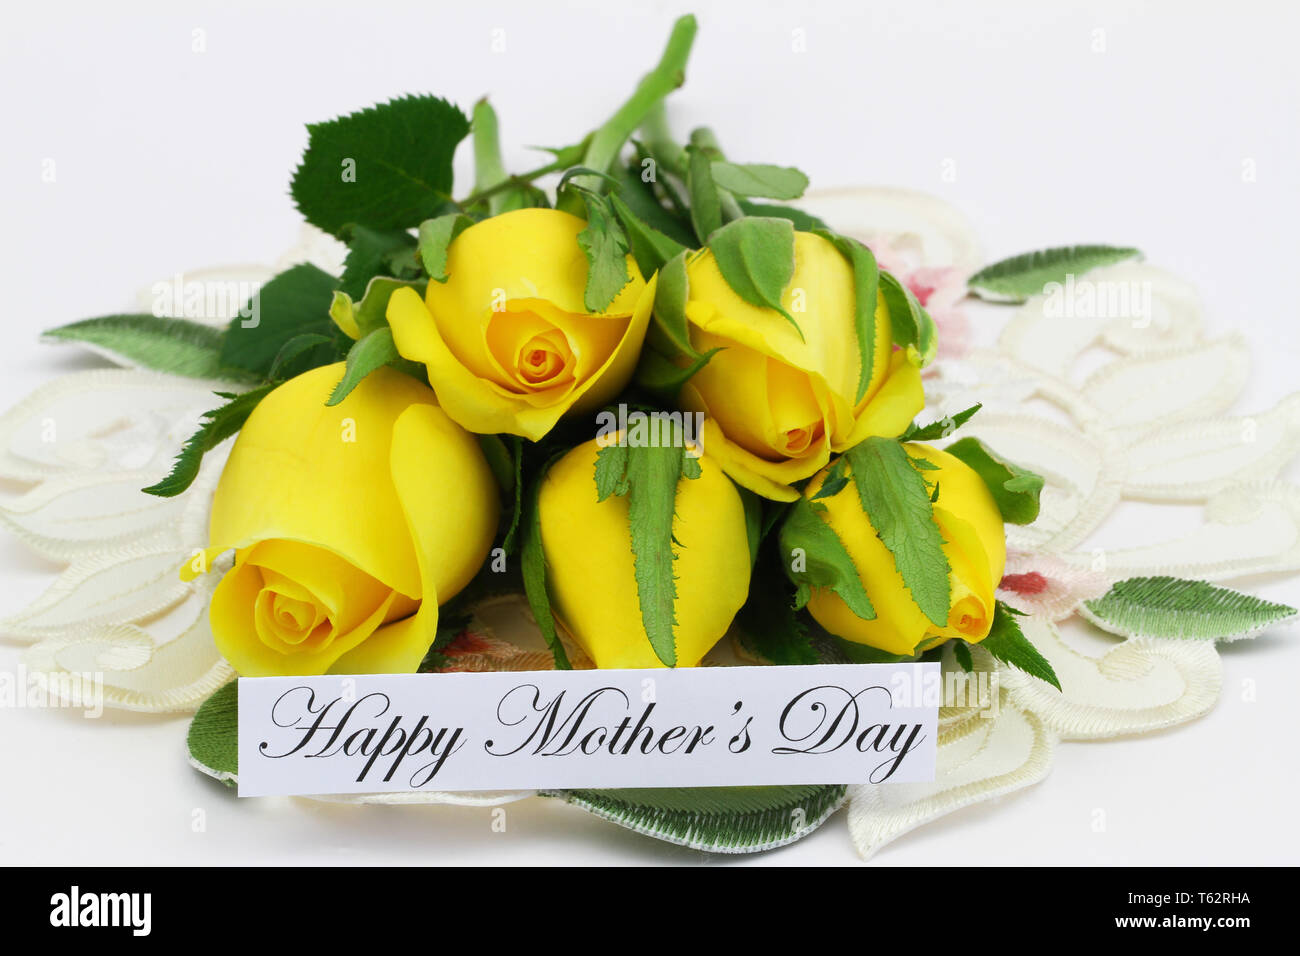 Happy Mothers day card with bunch of yellow tulips on white background Stock Photo